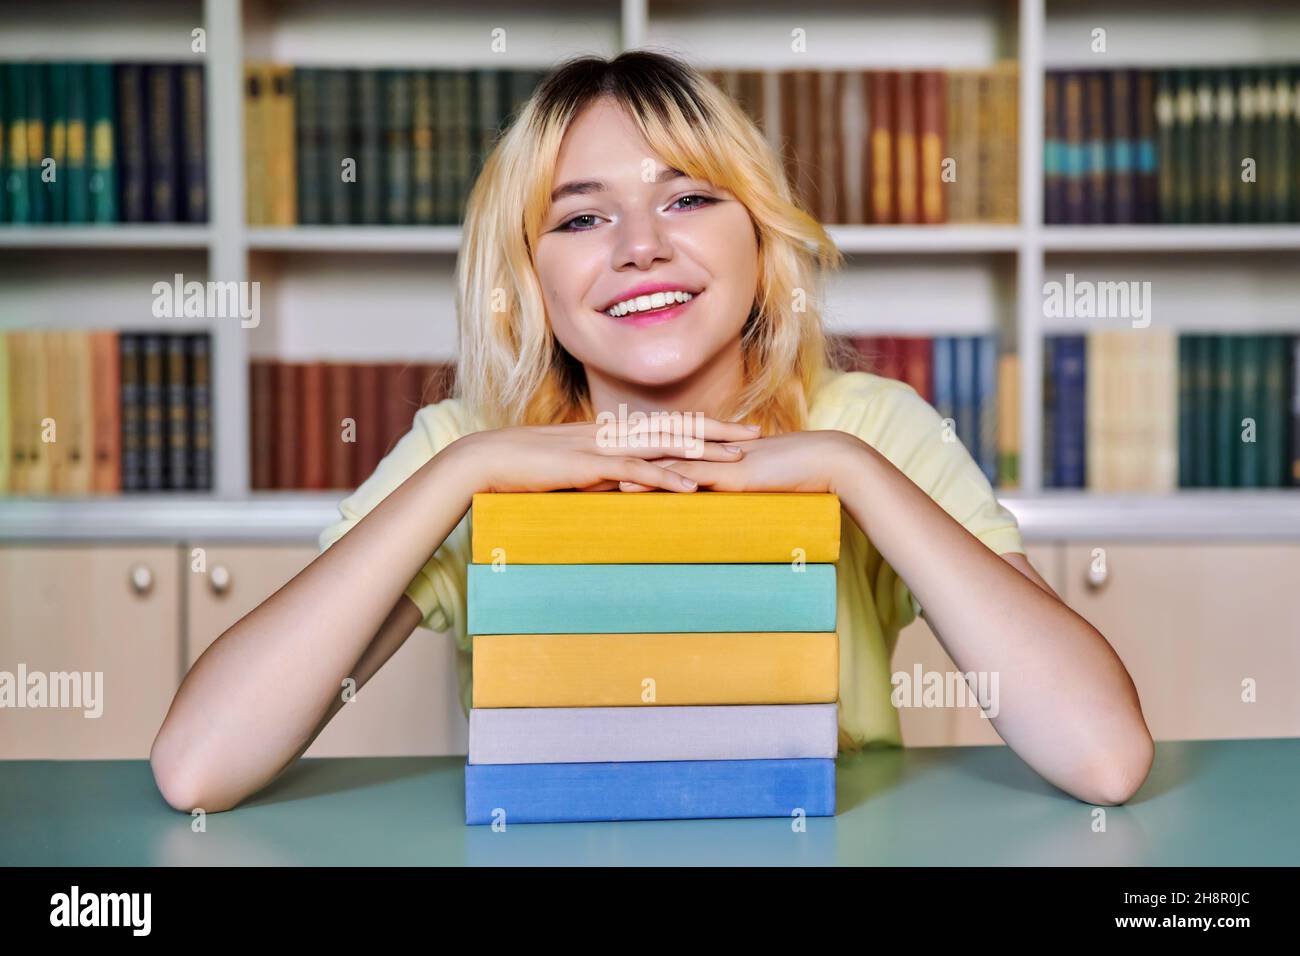 Female teenage high school student looking at camera with books in library Stock Photo